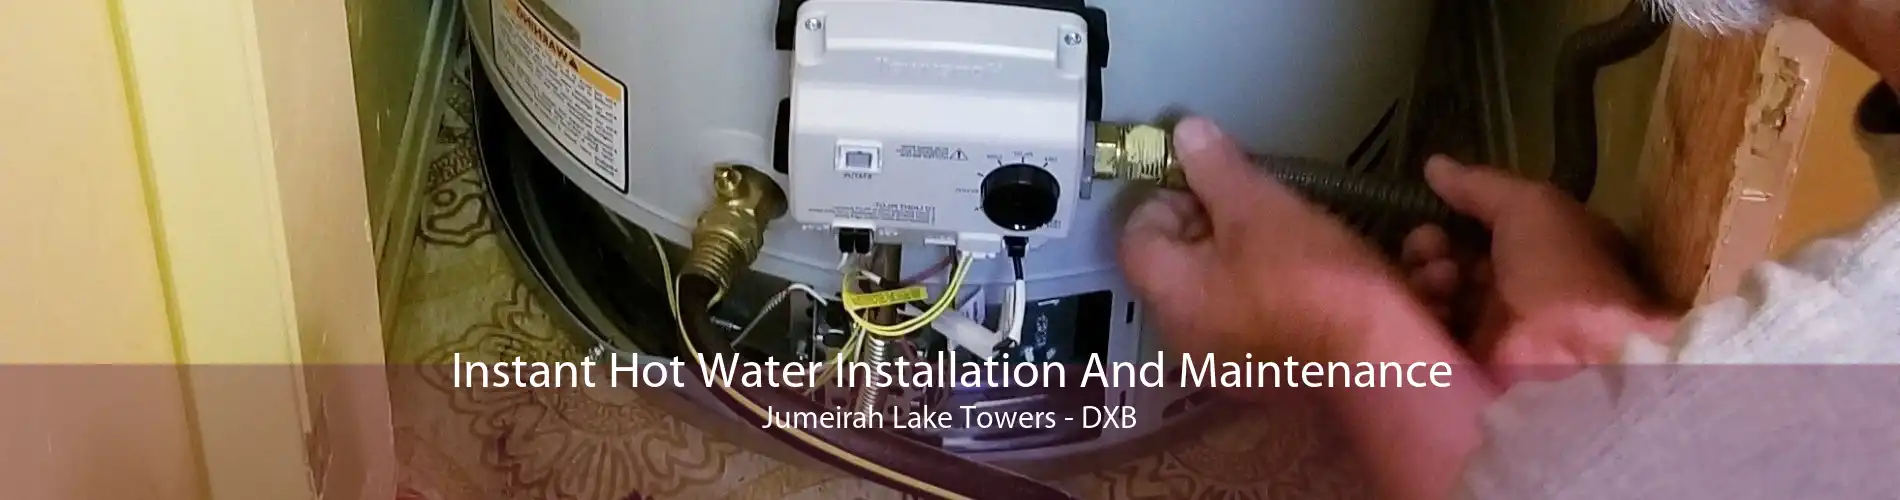 Instant Hot Water Installation And Maintenance Jumeirah Lake Towers - DXB